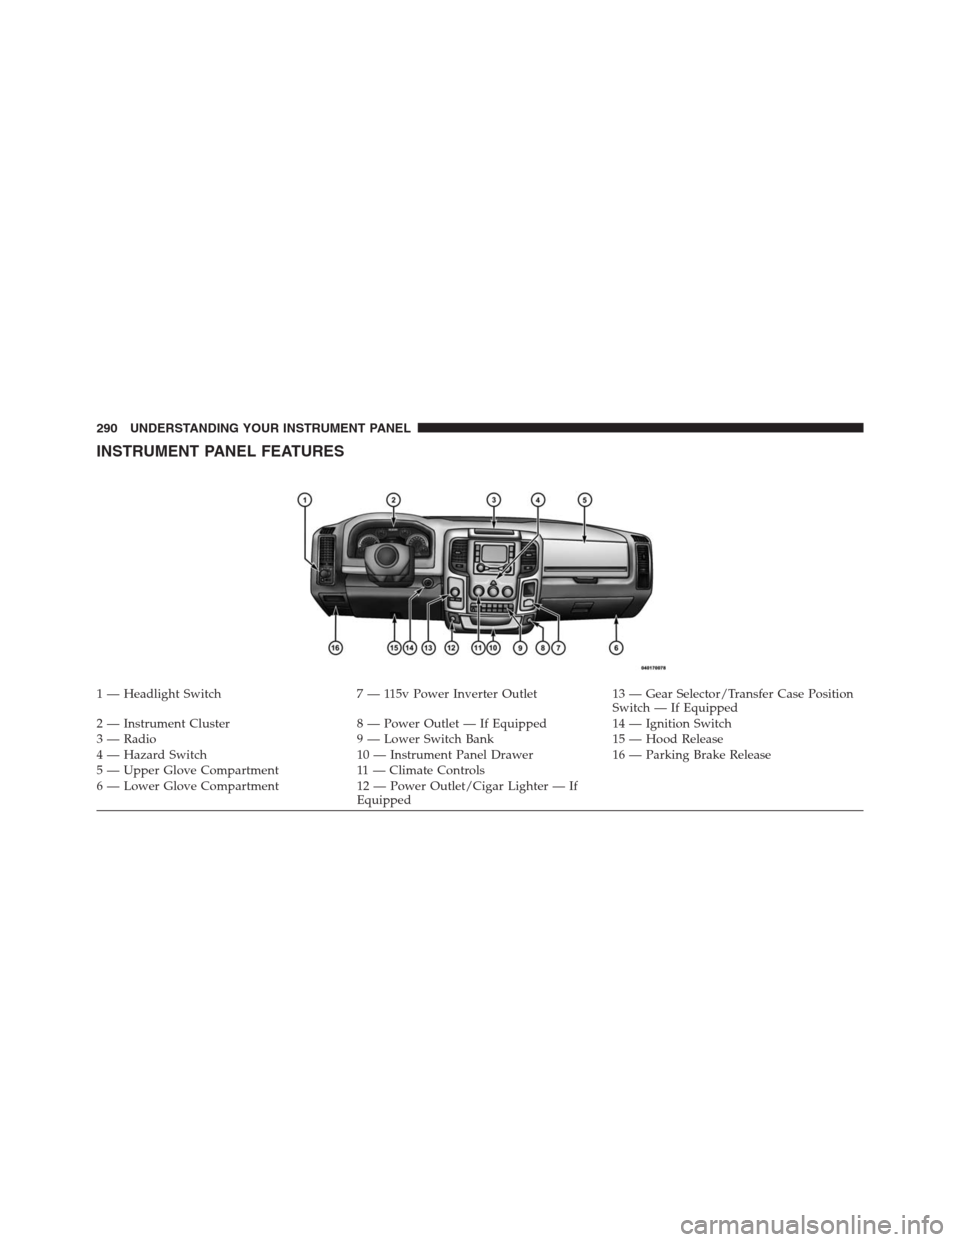 Ram 1500 2016  Owners Manual INSTRUMENT PANEL FEATURES
1 — Headlight Switch 7 — 115v Power Inverter Outlet 13 — Gear Selector/Transfer Case Position
Switch — If Equipped
2 — Instrument Cluster 8 — Power Outlet — If 